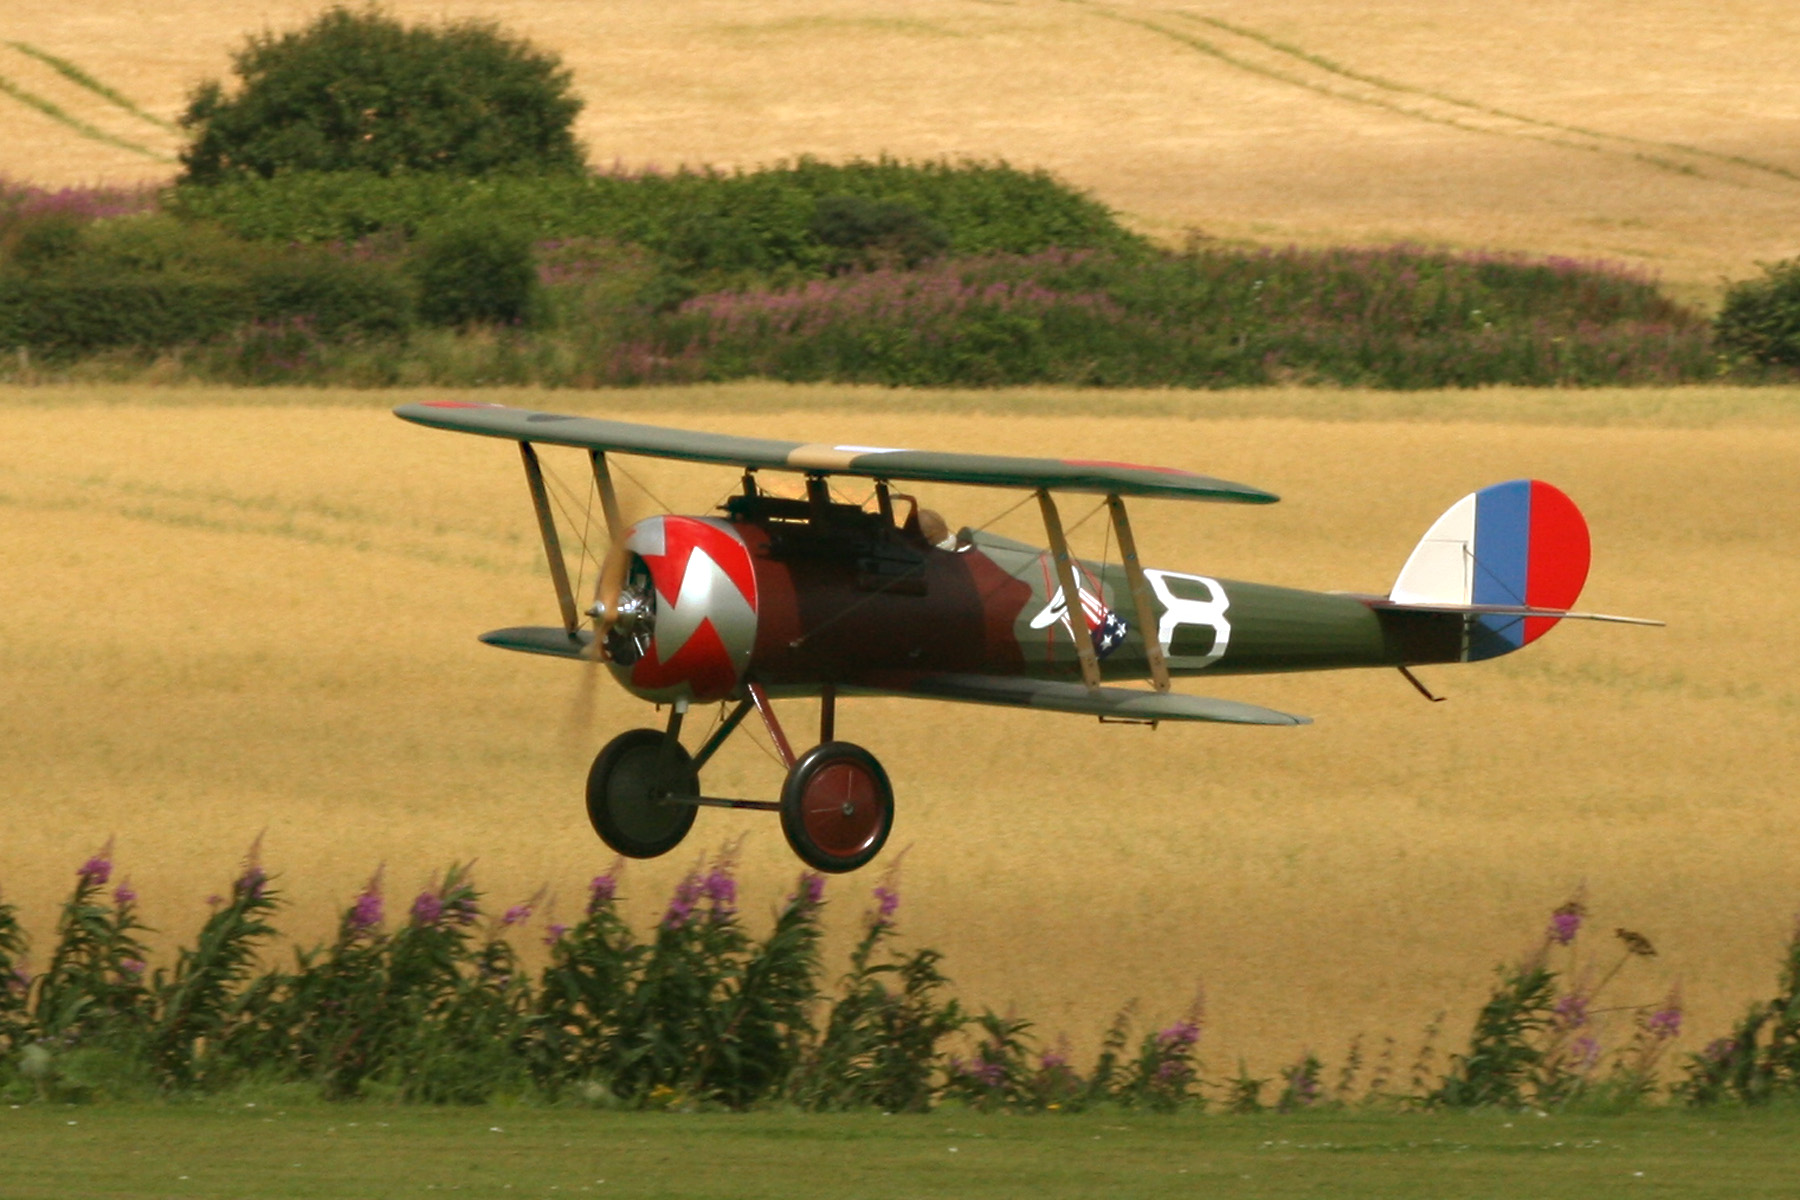 a radio controlled biplane being flown against a background of a wheat field